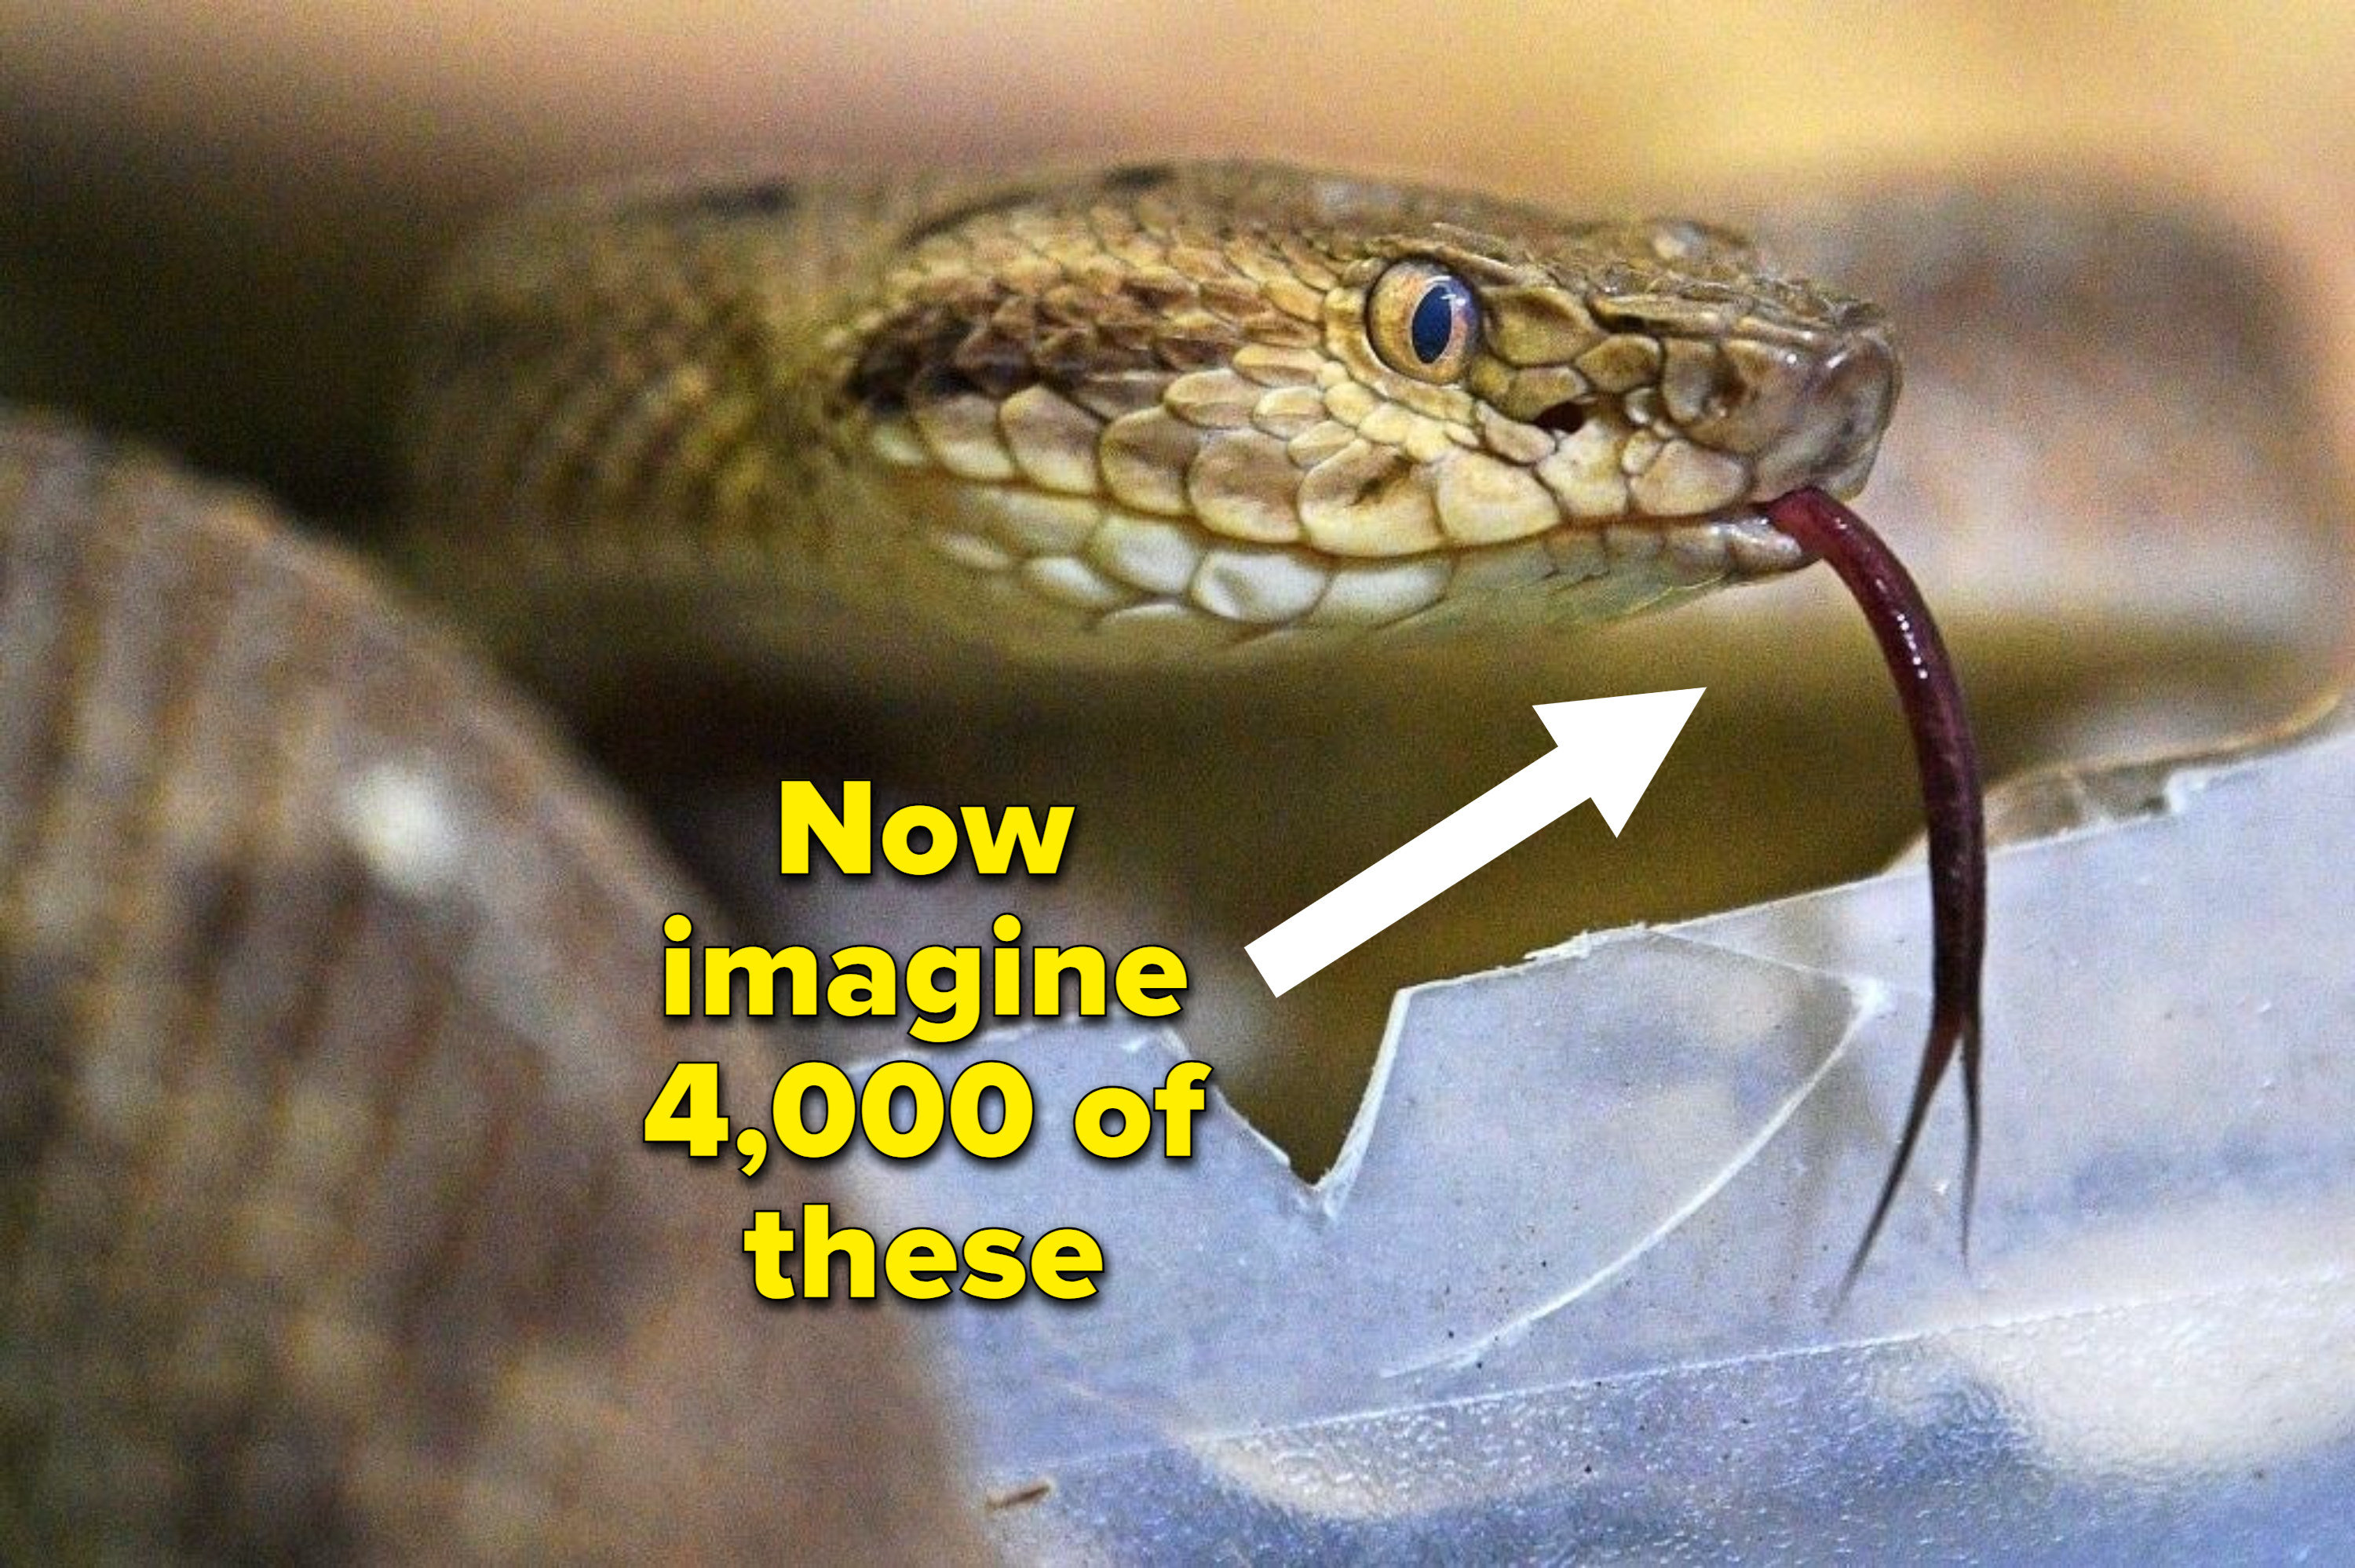 A snake sticking its tongue out with an arrow pointing saying Now imagine 4000 of these